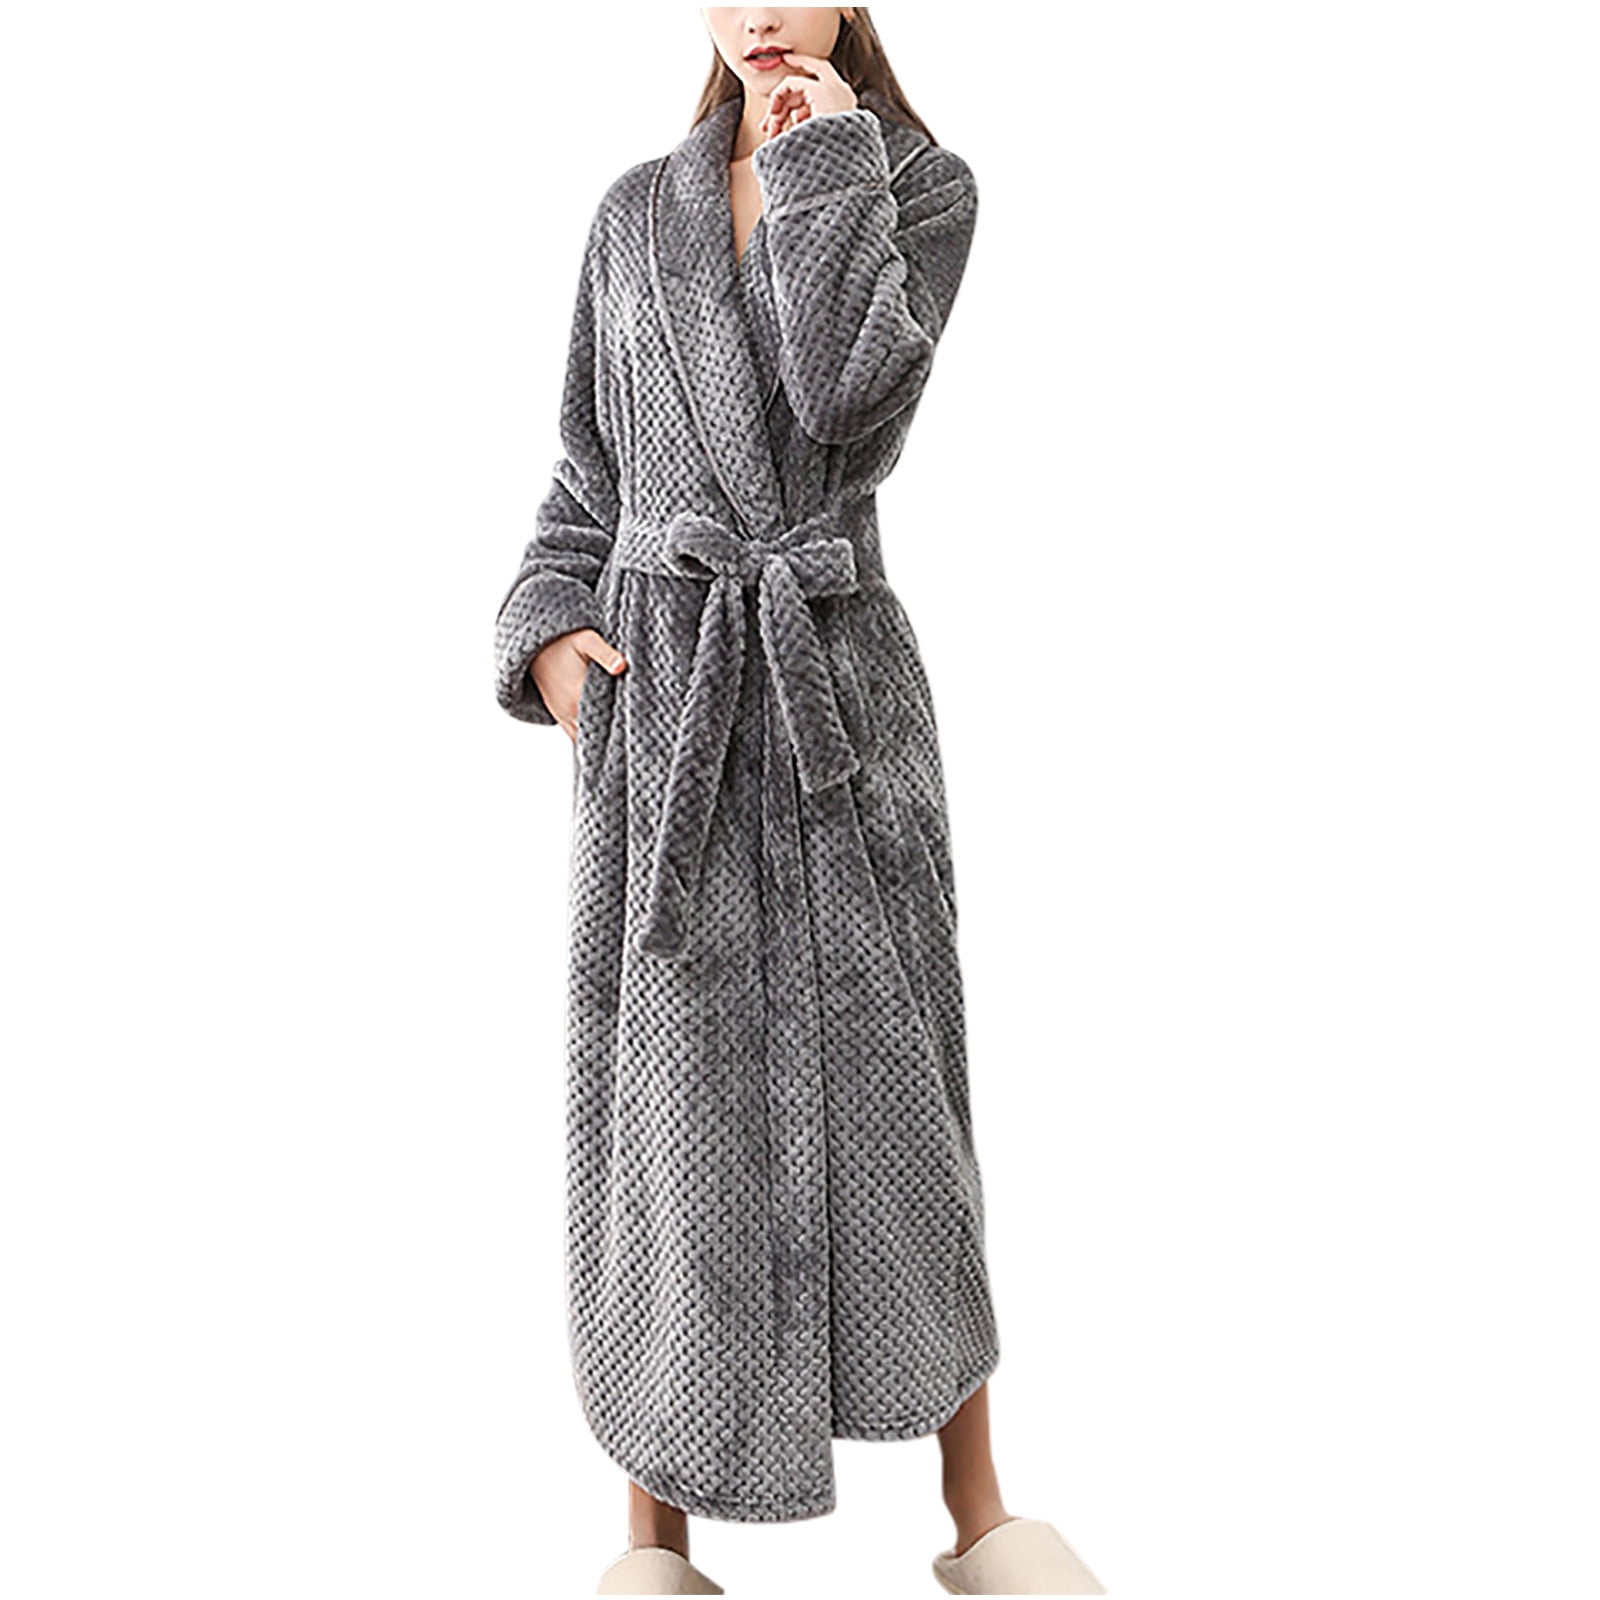 Stylosa Soft fleece dressing gown: for sale at 14.99€ on Mecshopping.it